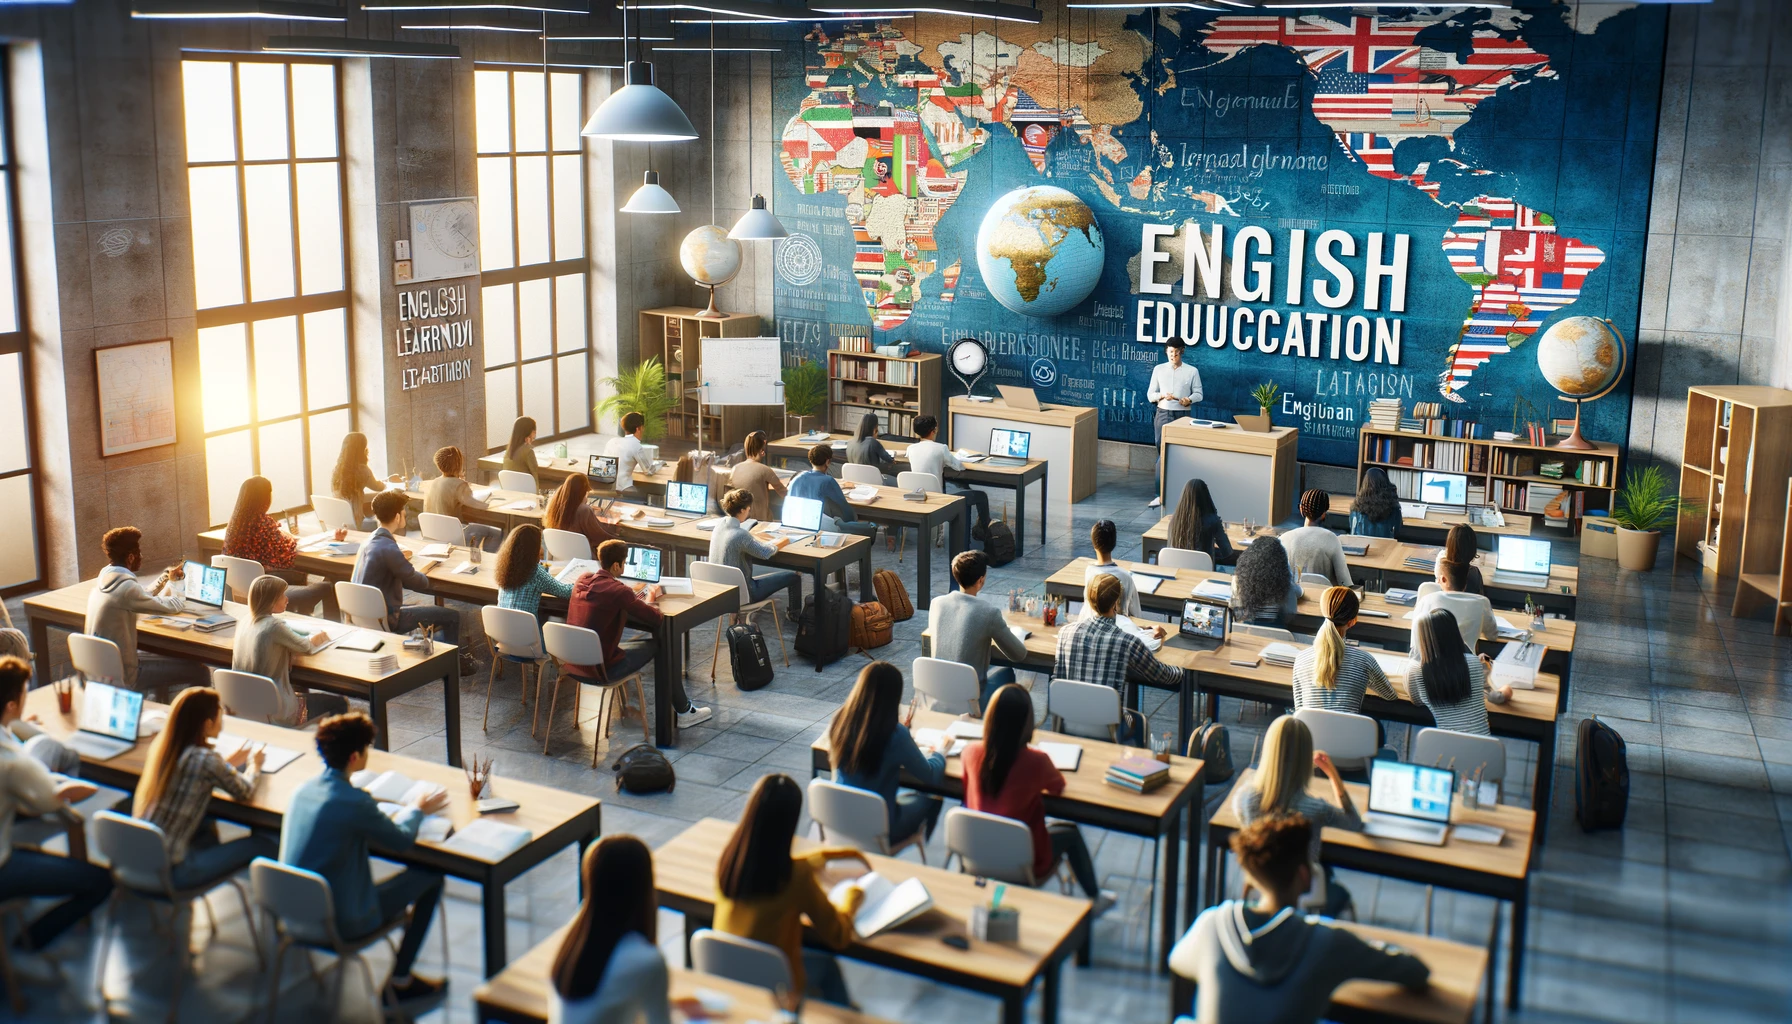 A modern and inspiring educational setting depicting a university department focused on English education and global perspectives. The image shows a diverse classroom with students of various ethnicities engaged in an interactive learning environment. The classroom is equipped with high-tech tools, such as digital whiteboards and tablets, facilitating a language learning session. Students are actively participating, some speaking or presenting in front of the class, others working in small groups. Maps, globes, and international flags decorate the space, emphasizing a global outlook and multicultural education.